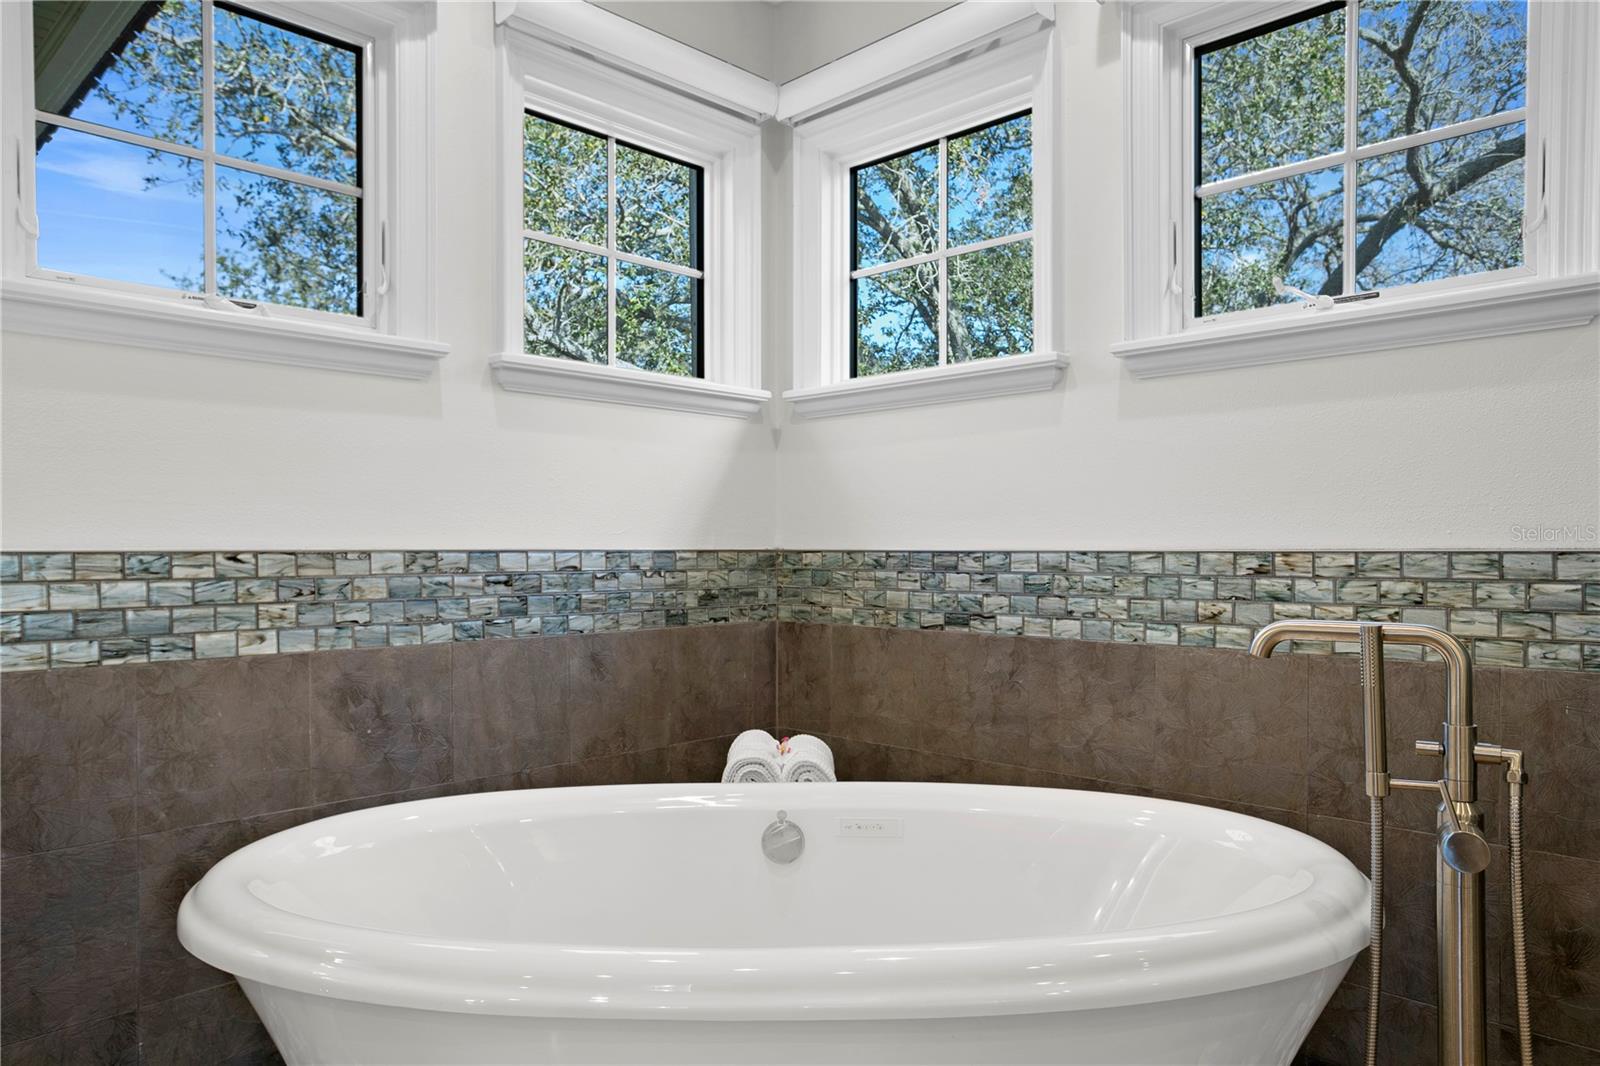 This is the soaking tub you won't want to live without.